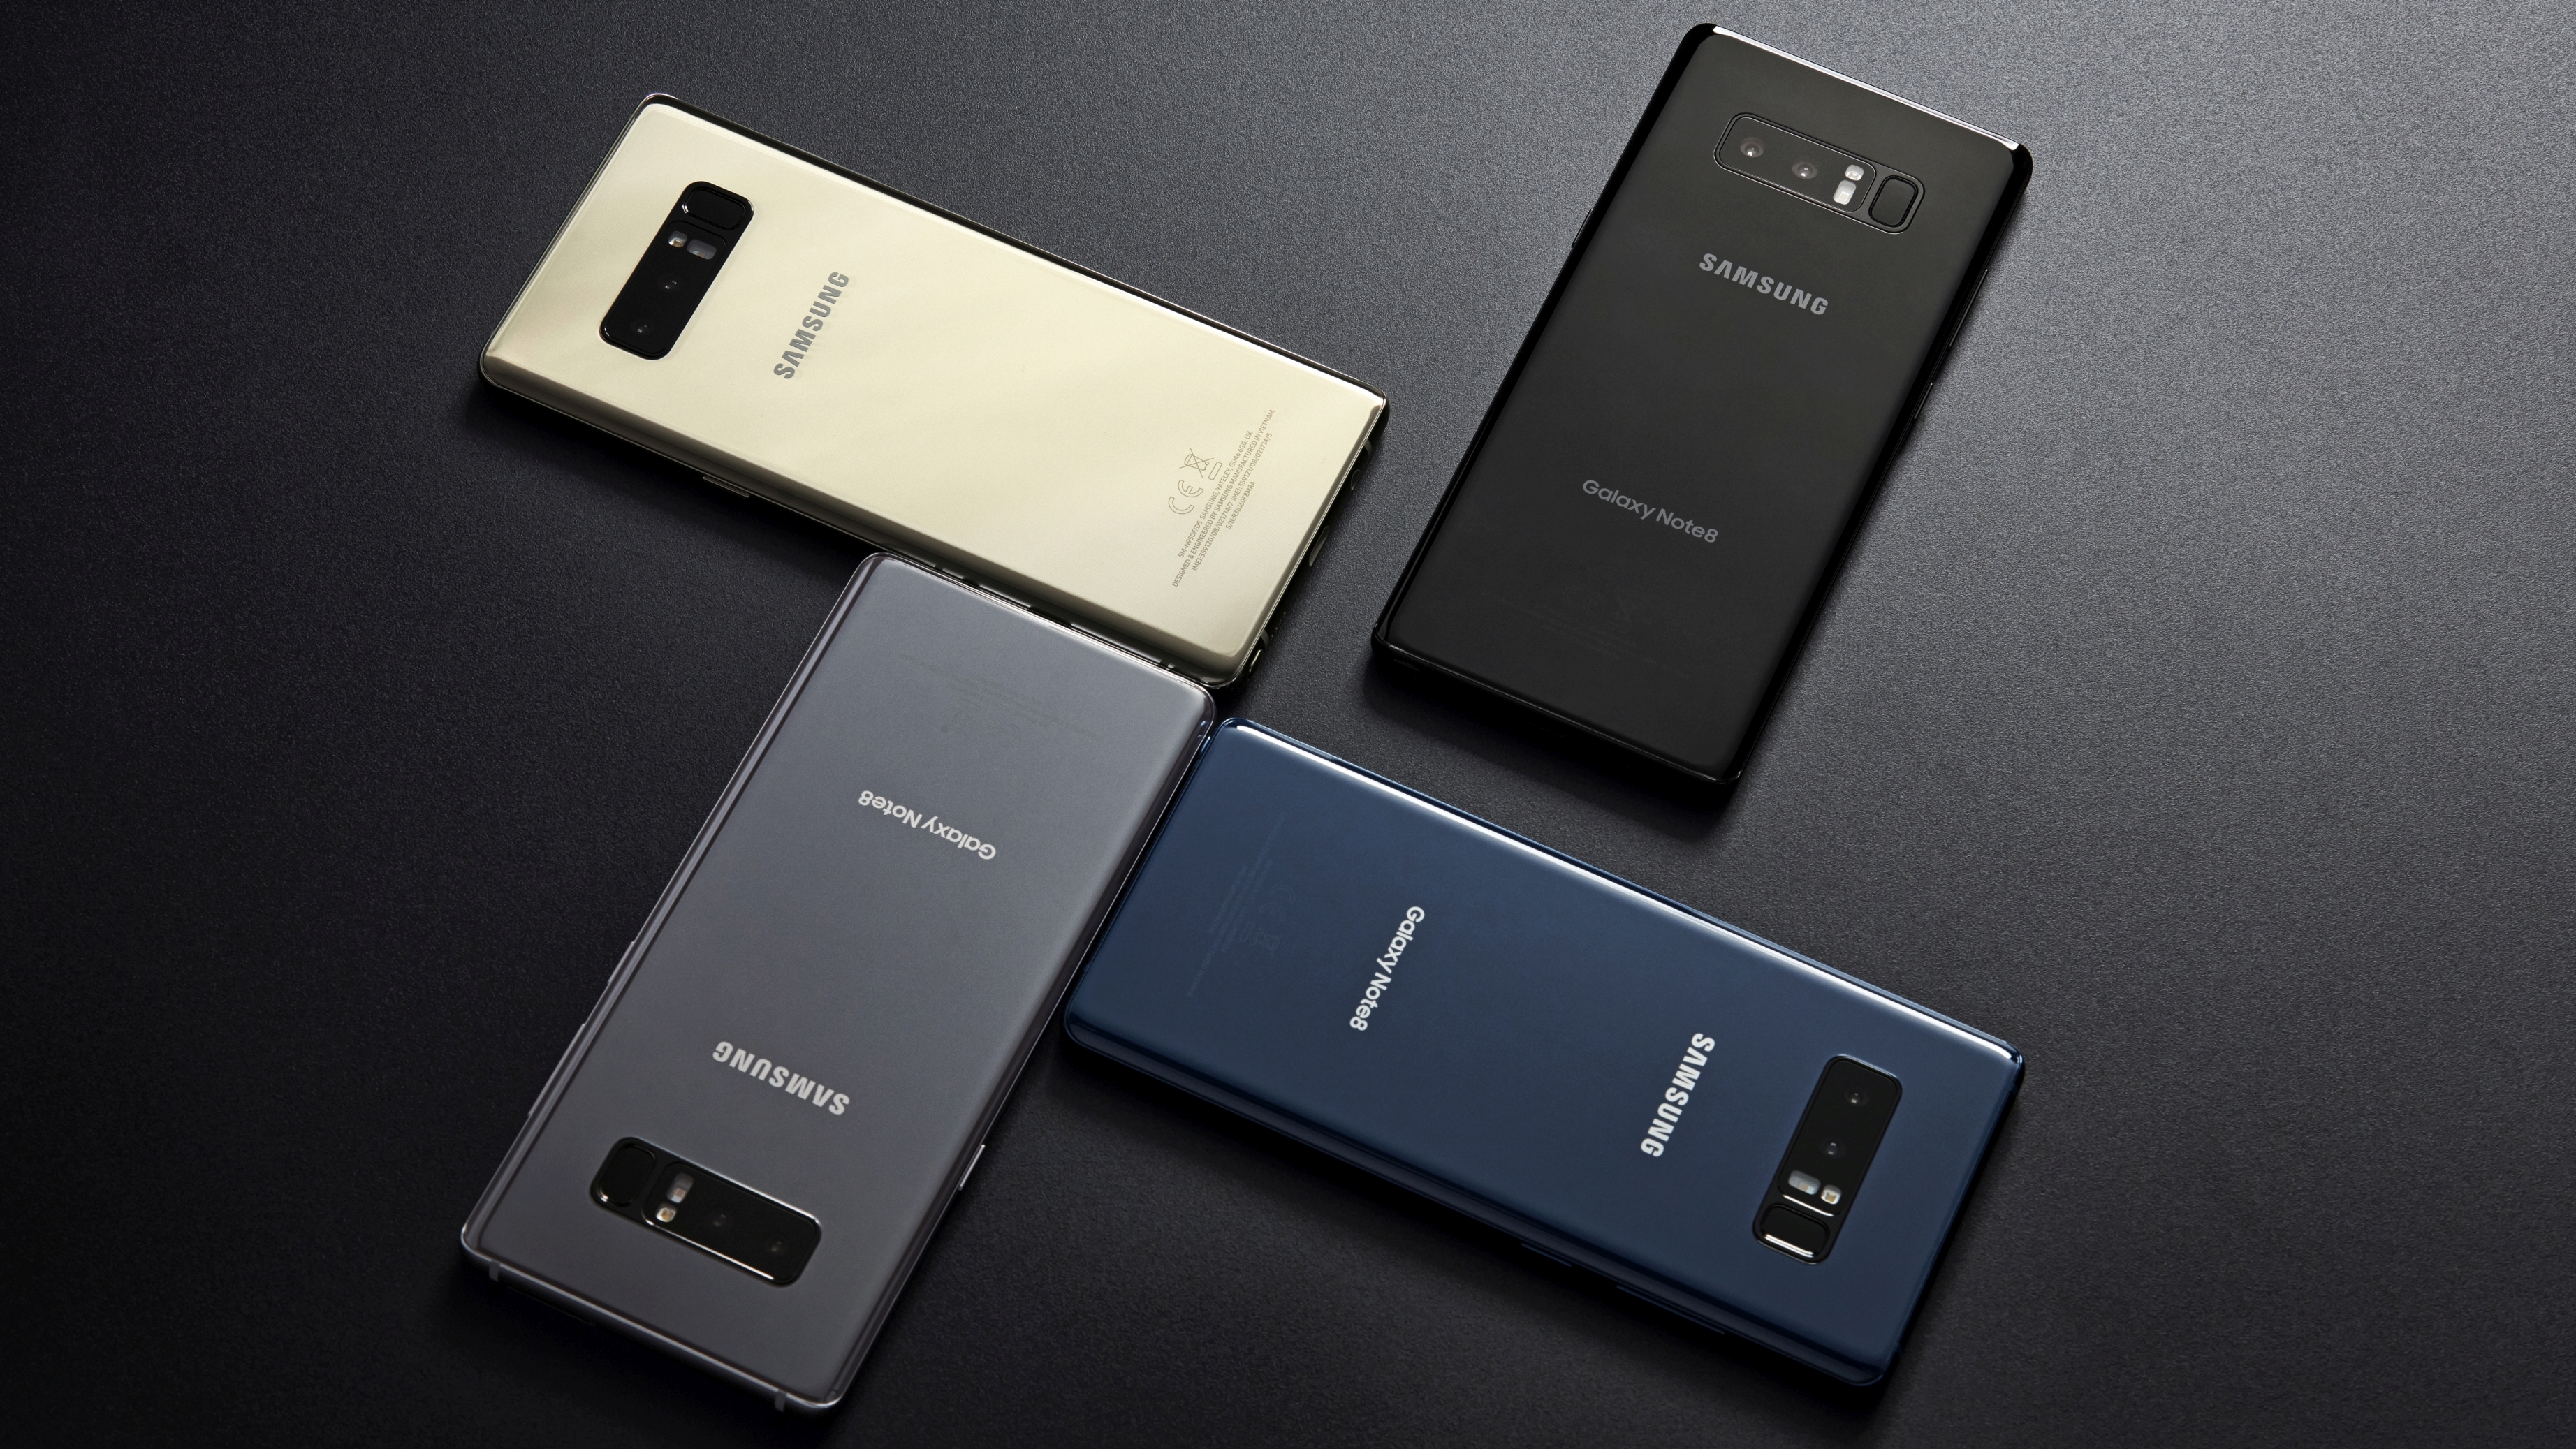 Samsung Galaxy Note 8 colors: all the shades confirmed | TechRadar